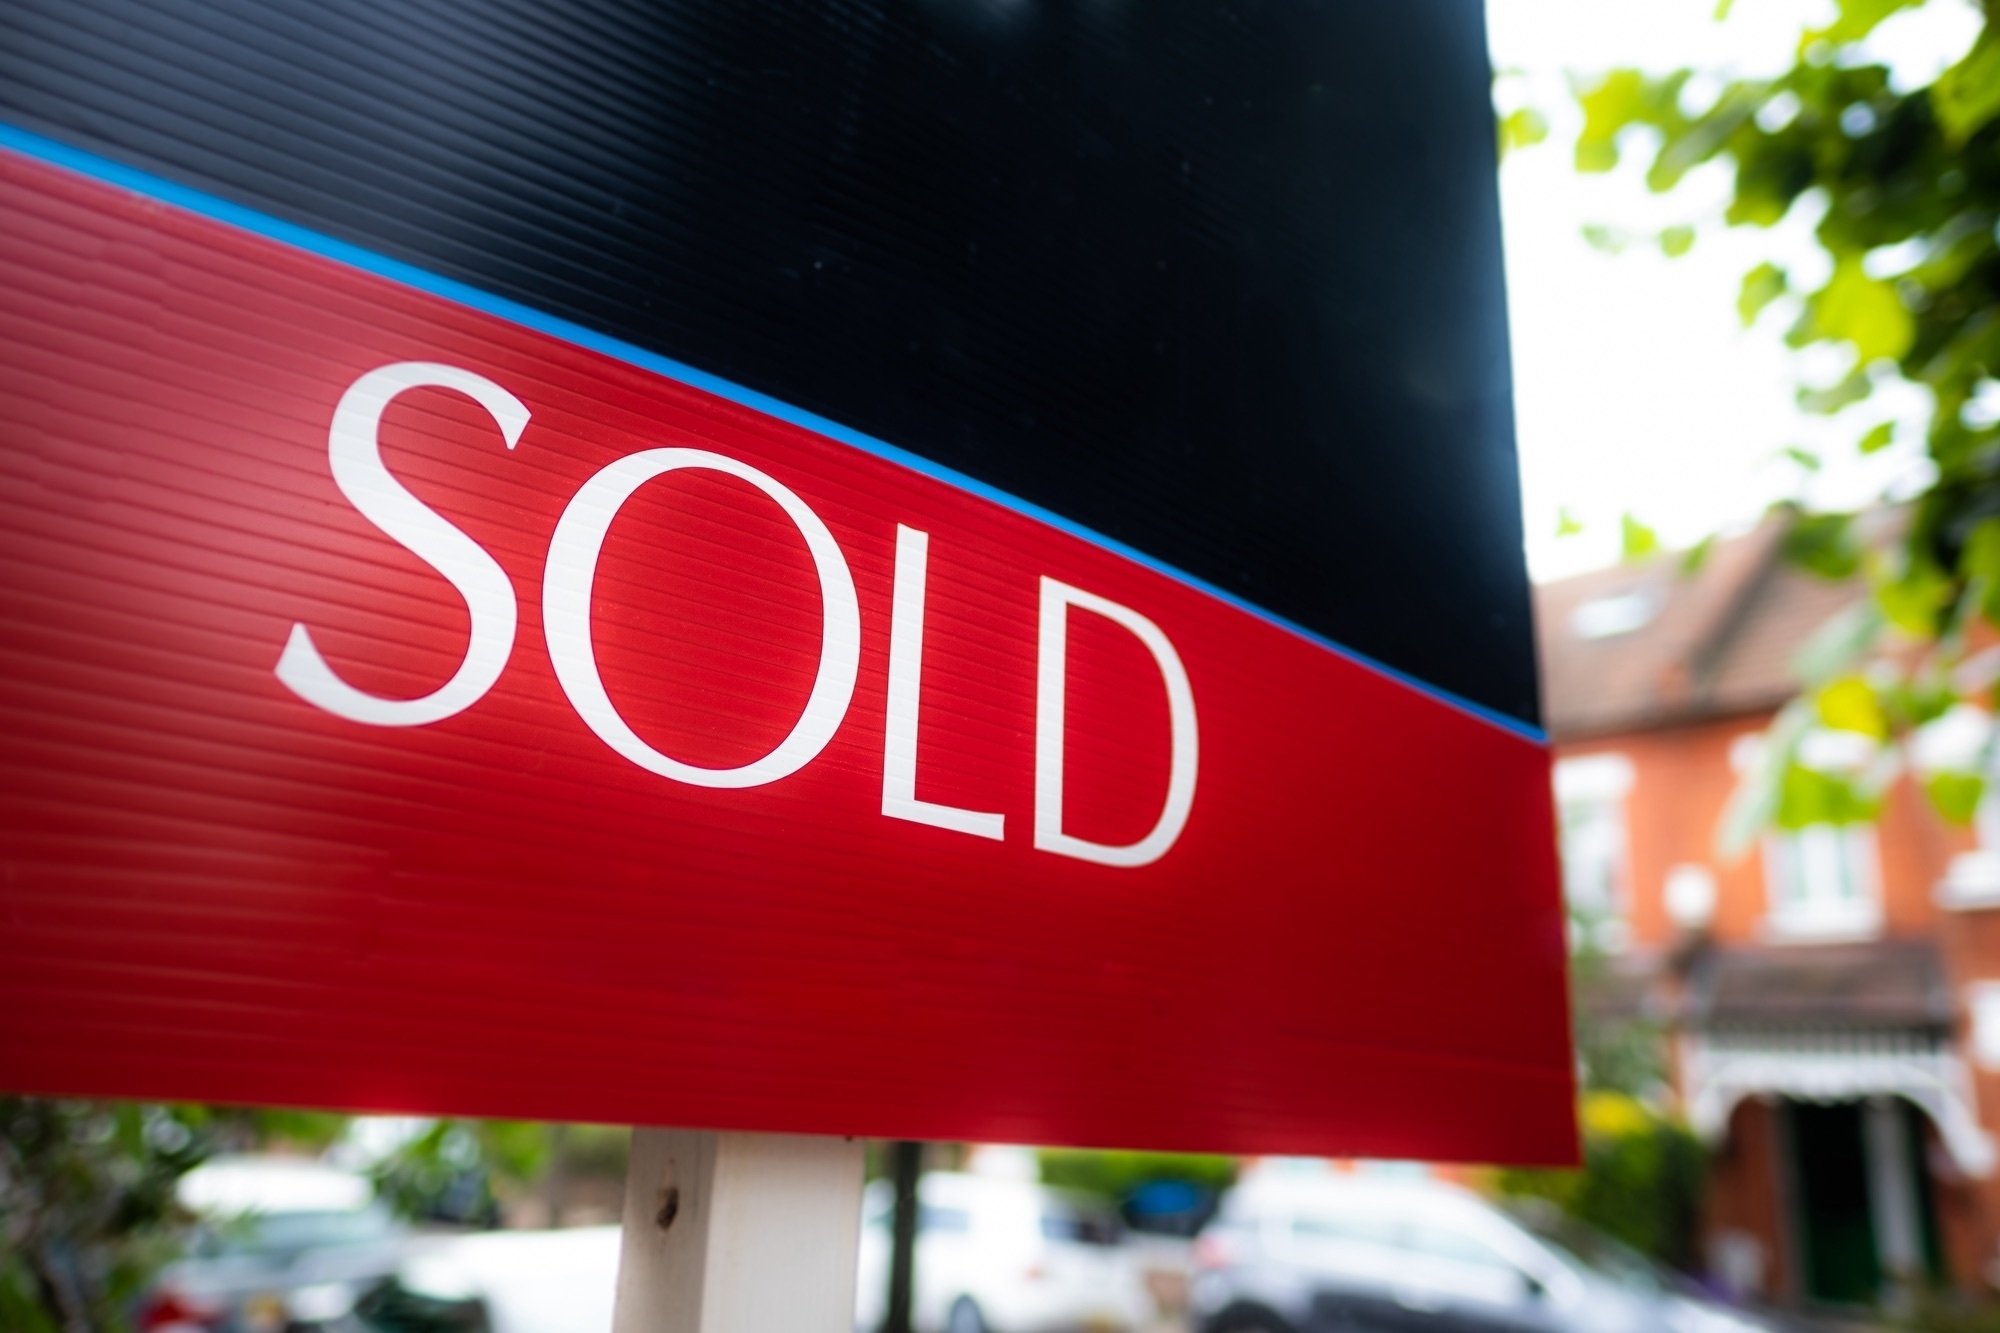 Ss estate agent sold sign on residential street